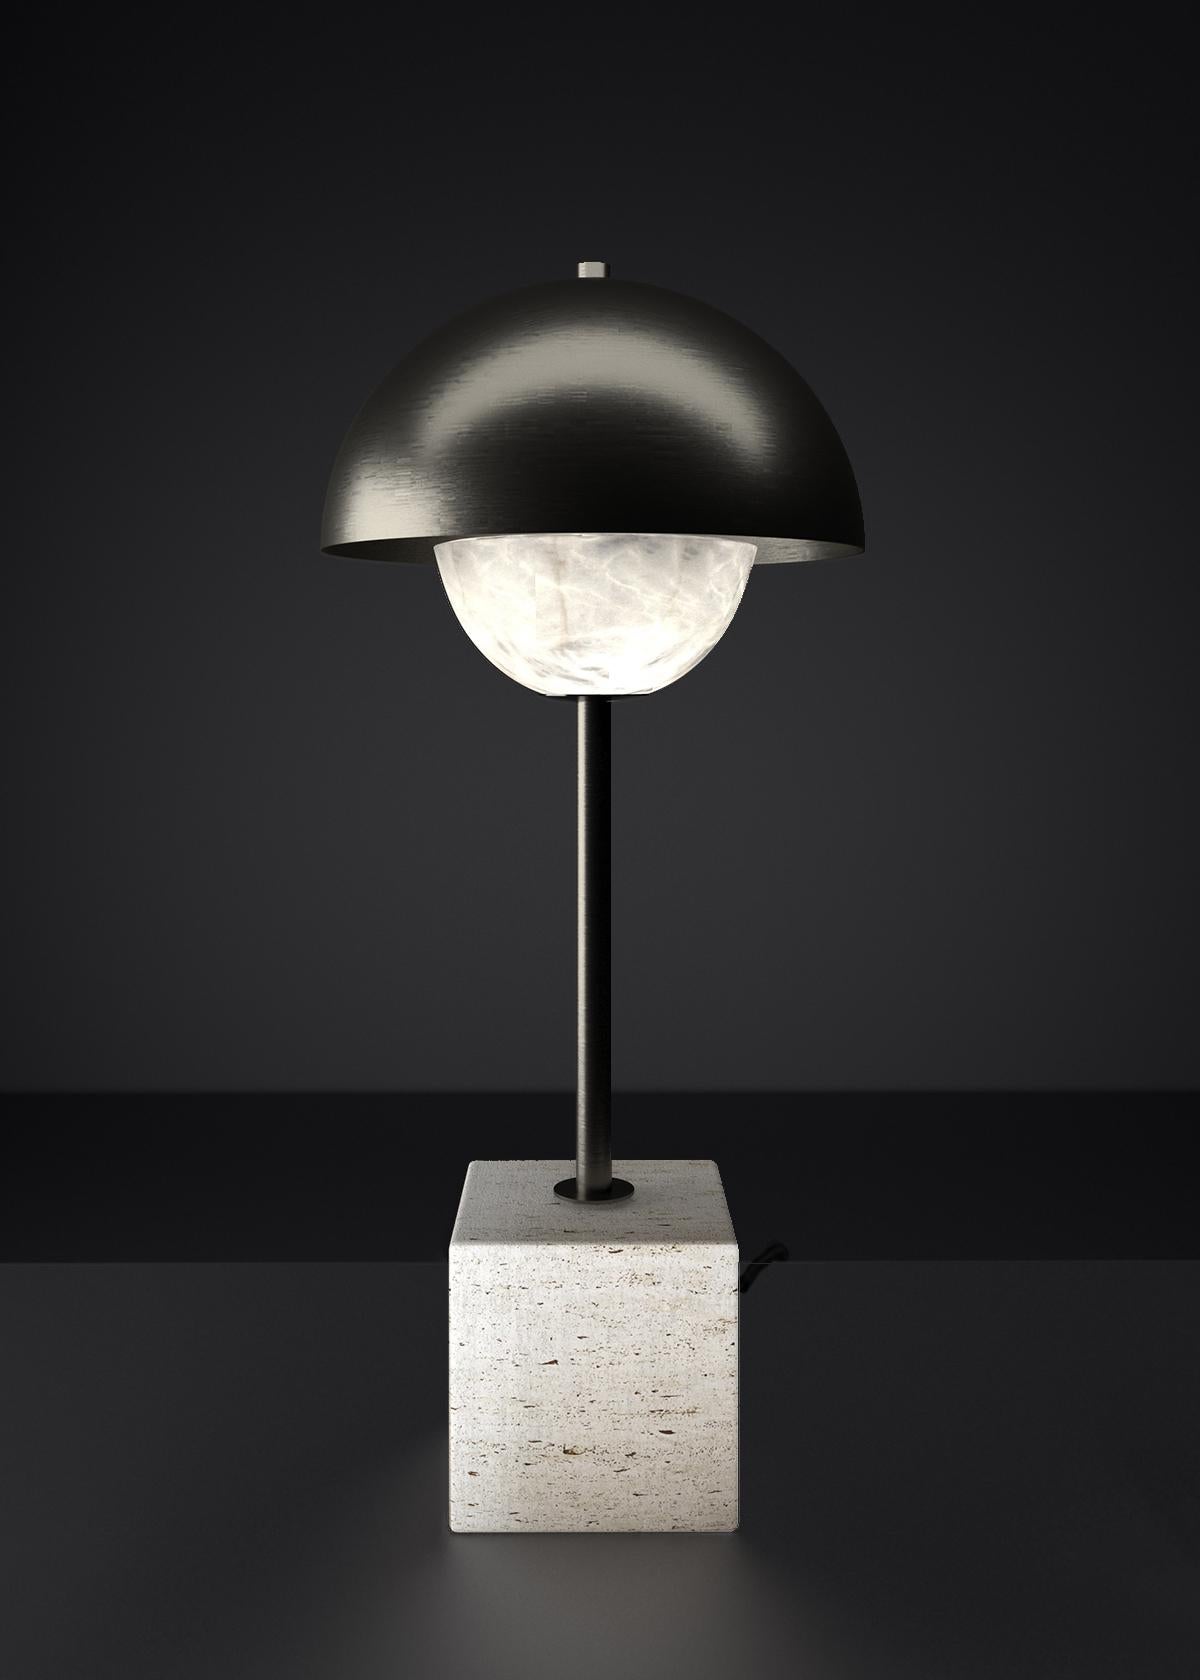 Apollo Brushed Black Metal Table Lamp by Alabastro Italiano
Dimensions: D 30 x W 30 x H 74 cm.
Materials: White alabaster, Marble, black silk cables and bronze.

Available in different finishes: Shiny Silver, Bronze, Brushed Brass, Ruggine of